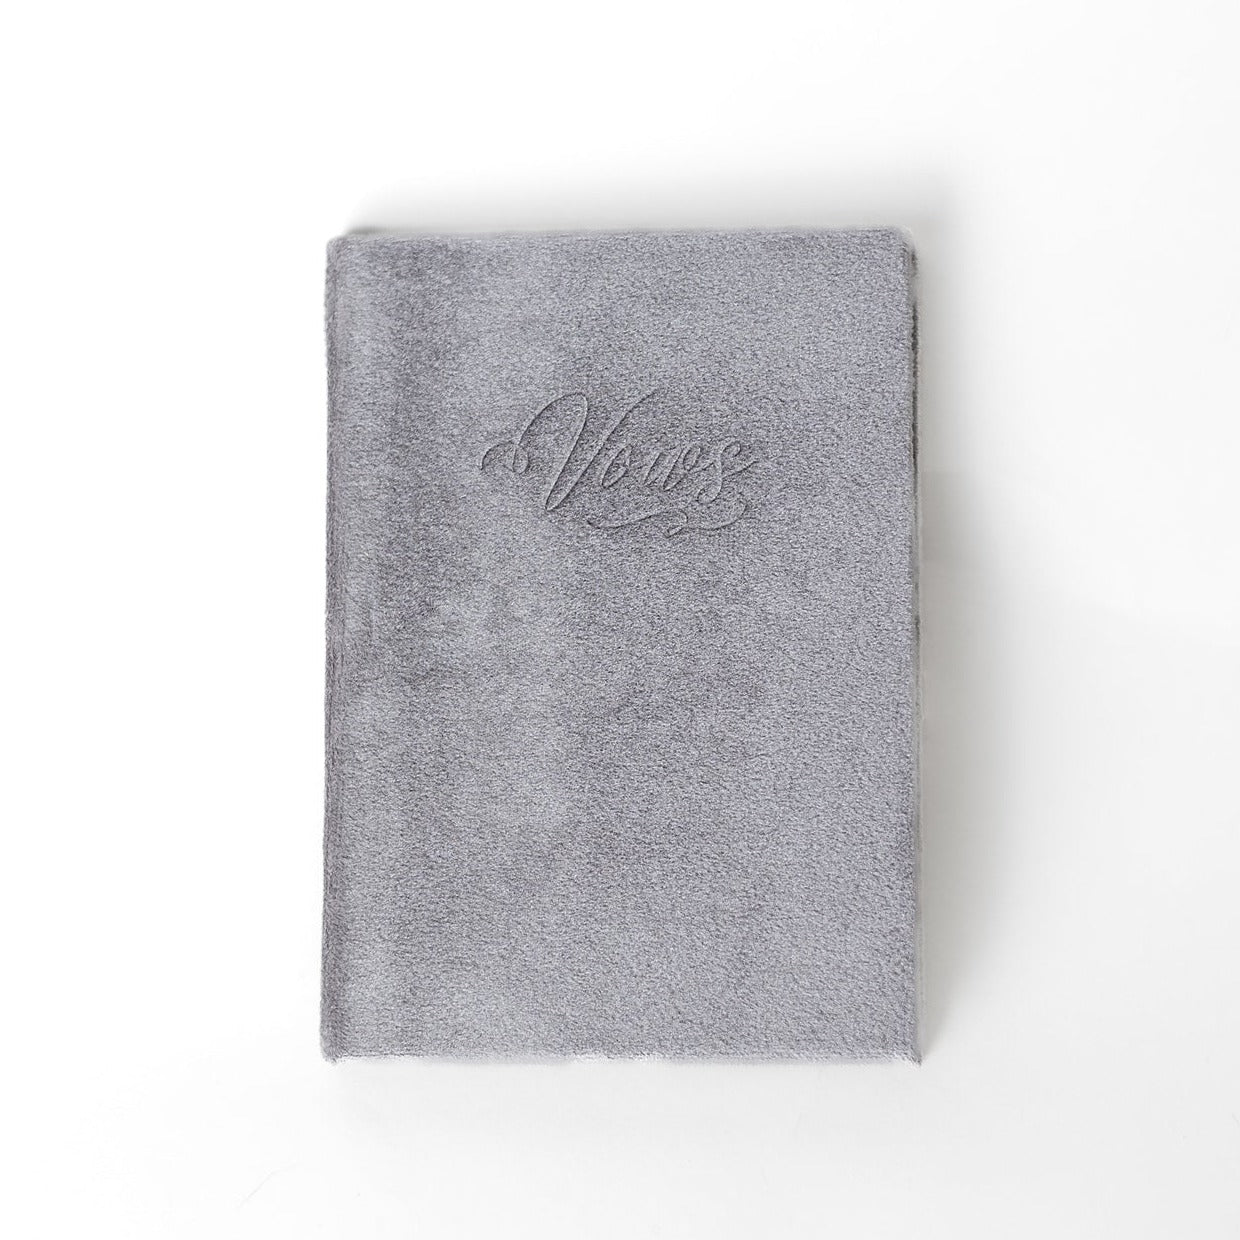 A silver vow book with the word "Vows" embossed on the front cover.